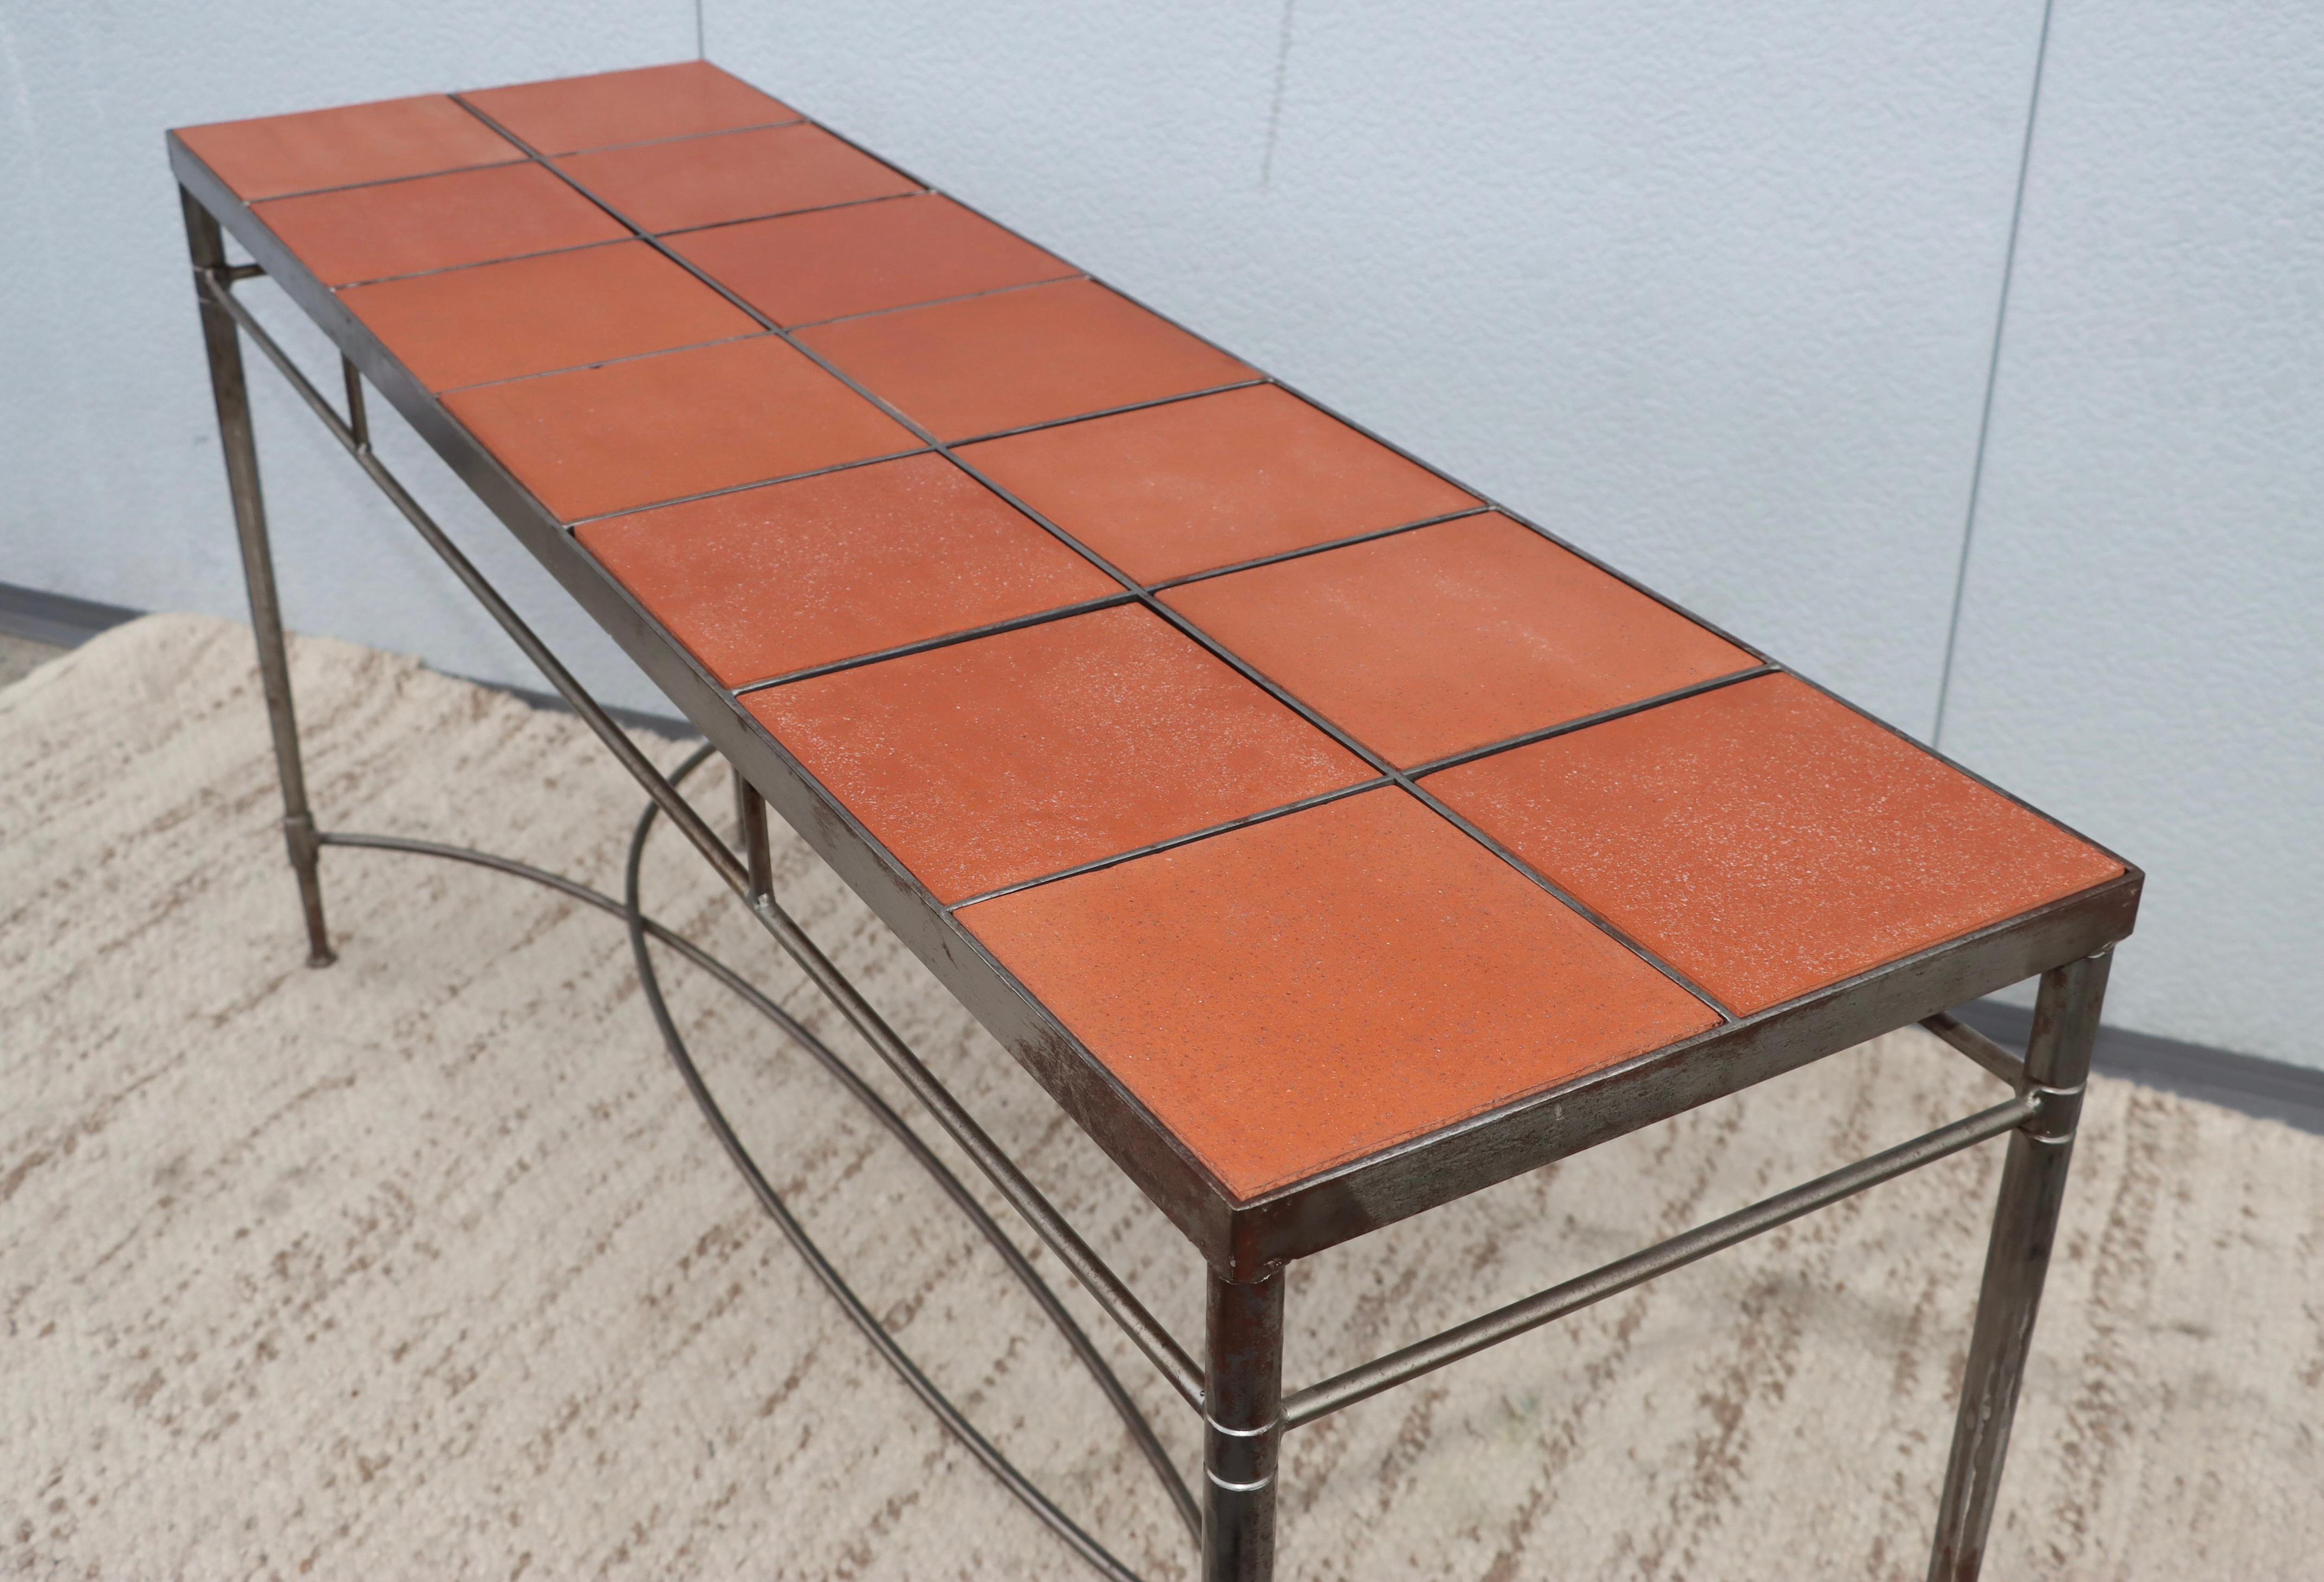 1970's Italian Iron Console Table with Impruneta Terracotta Tile Inserts For Sale 3